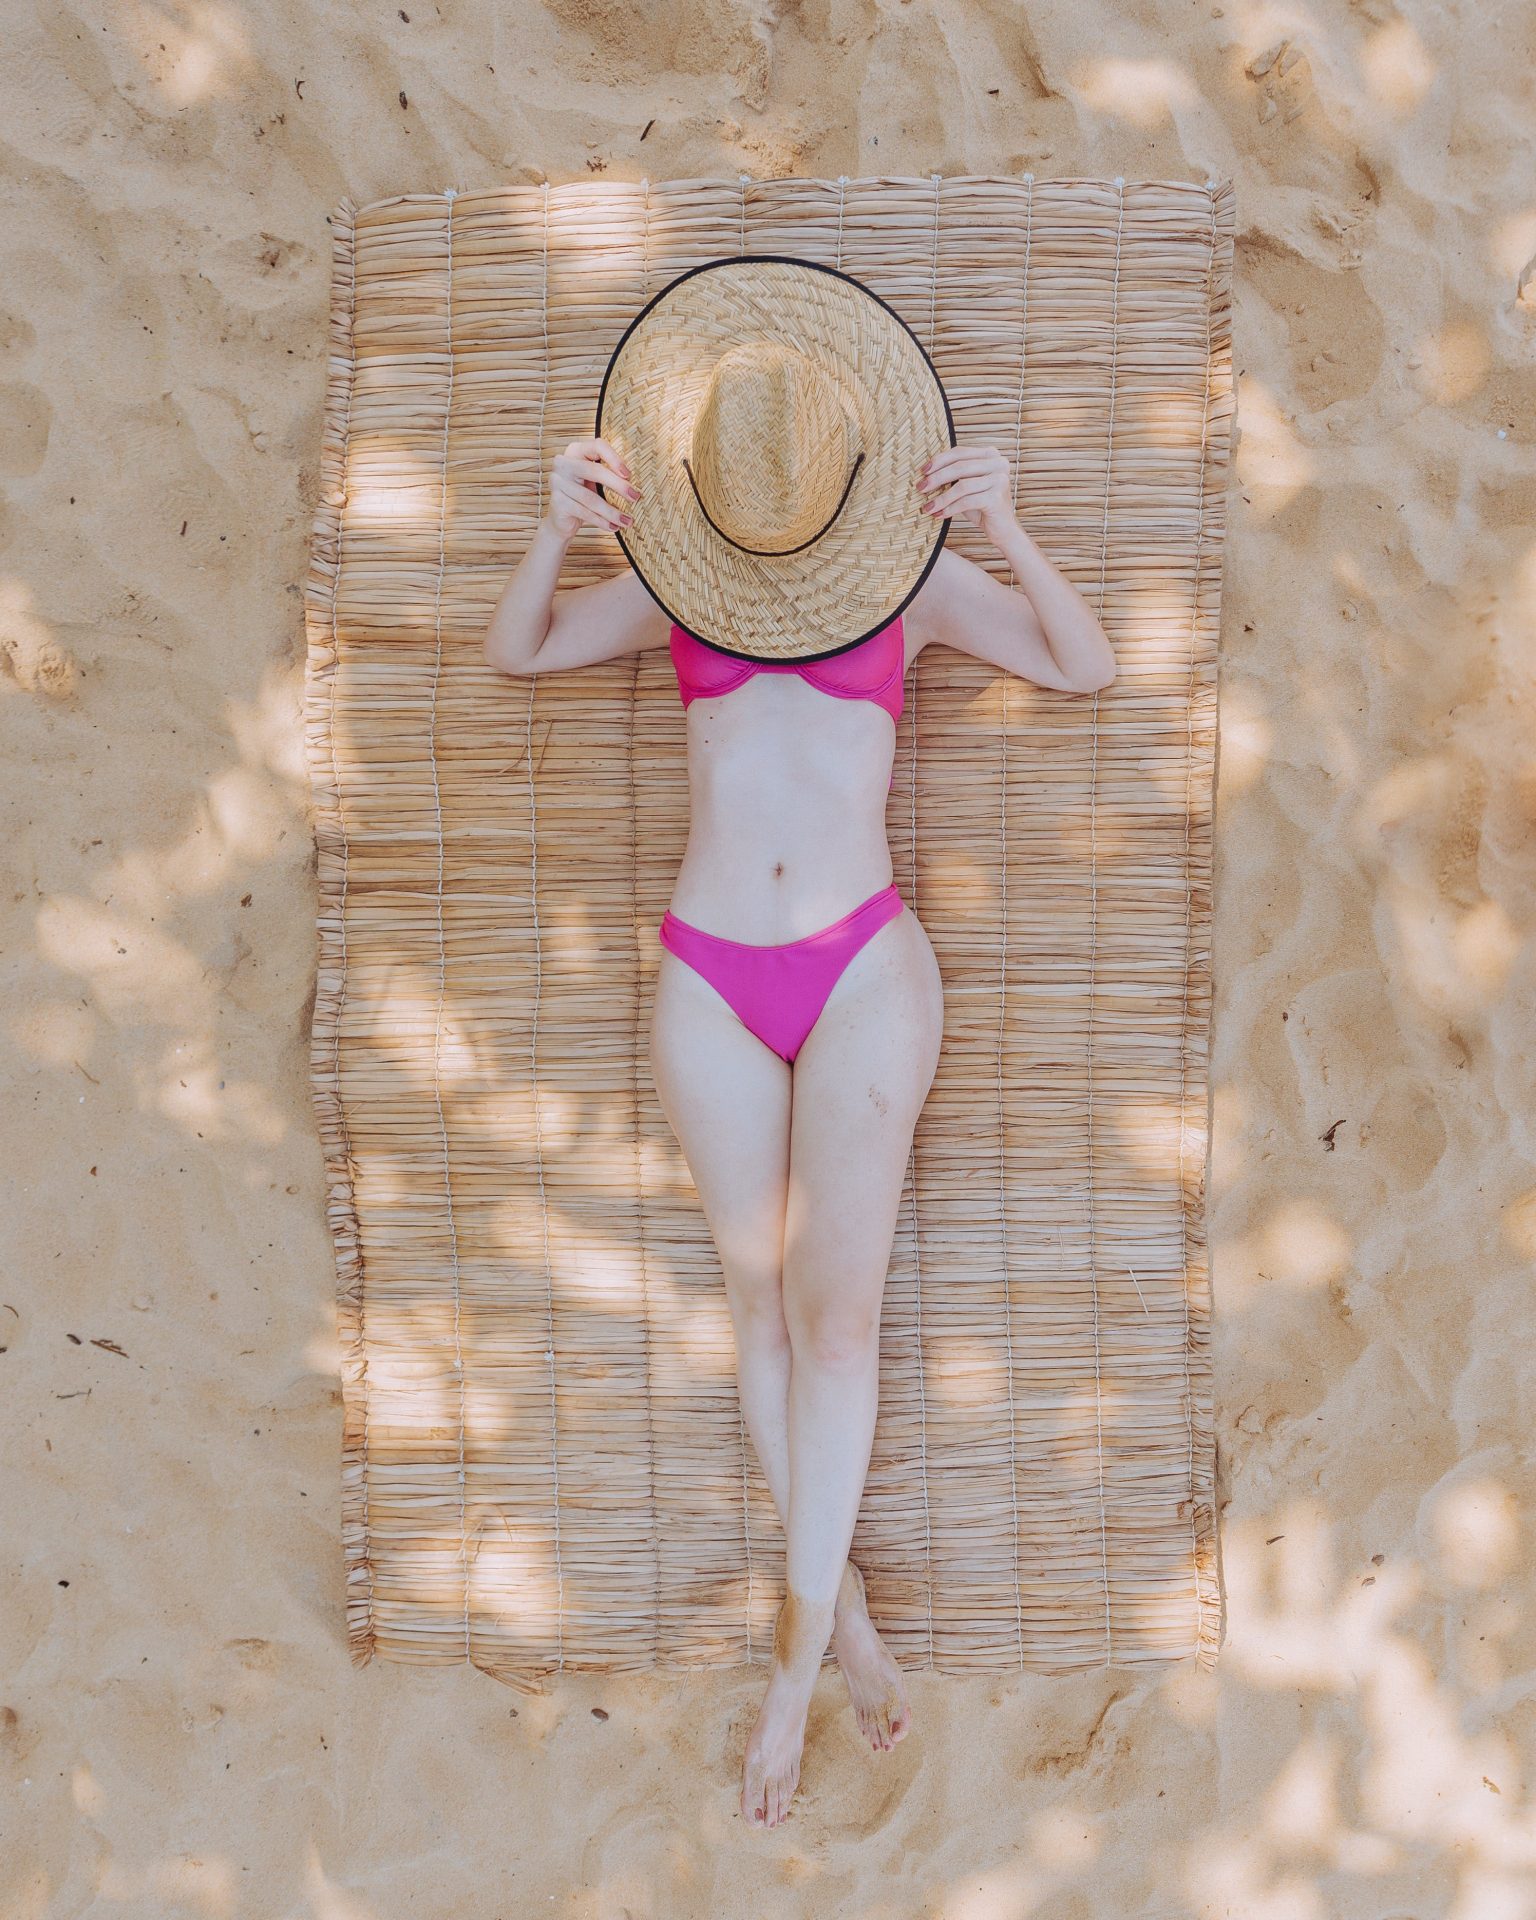 A Woman in Pink Bikini Covering Her Face with a Hat